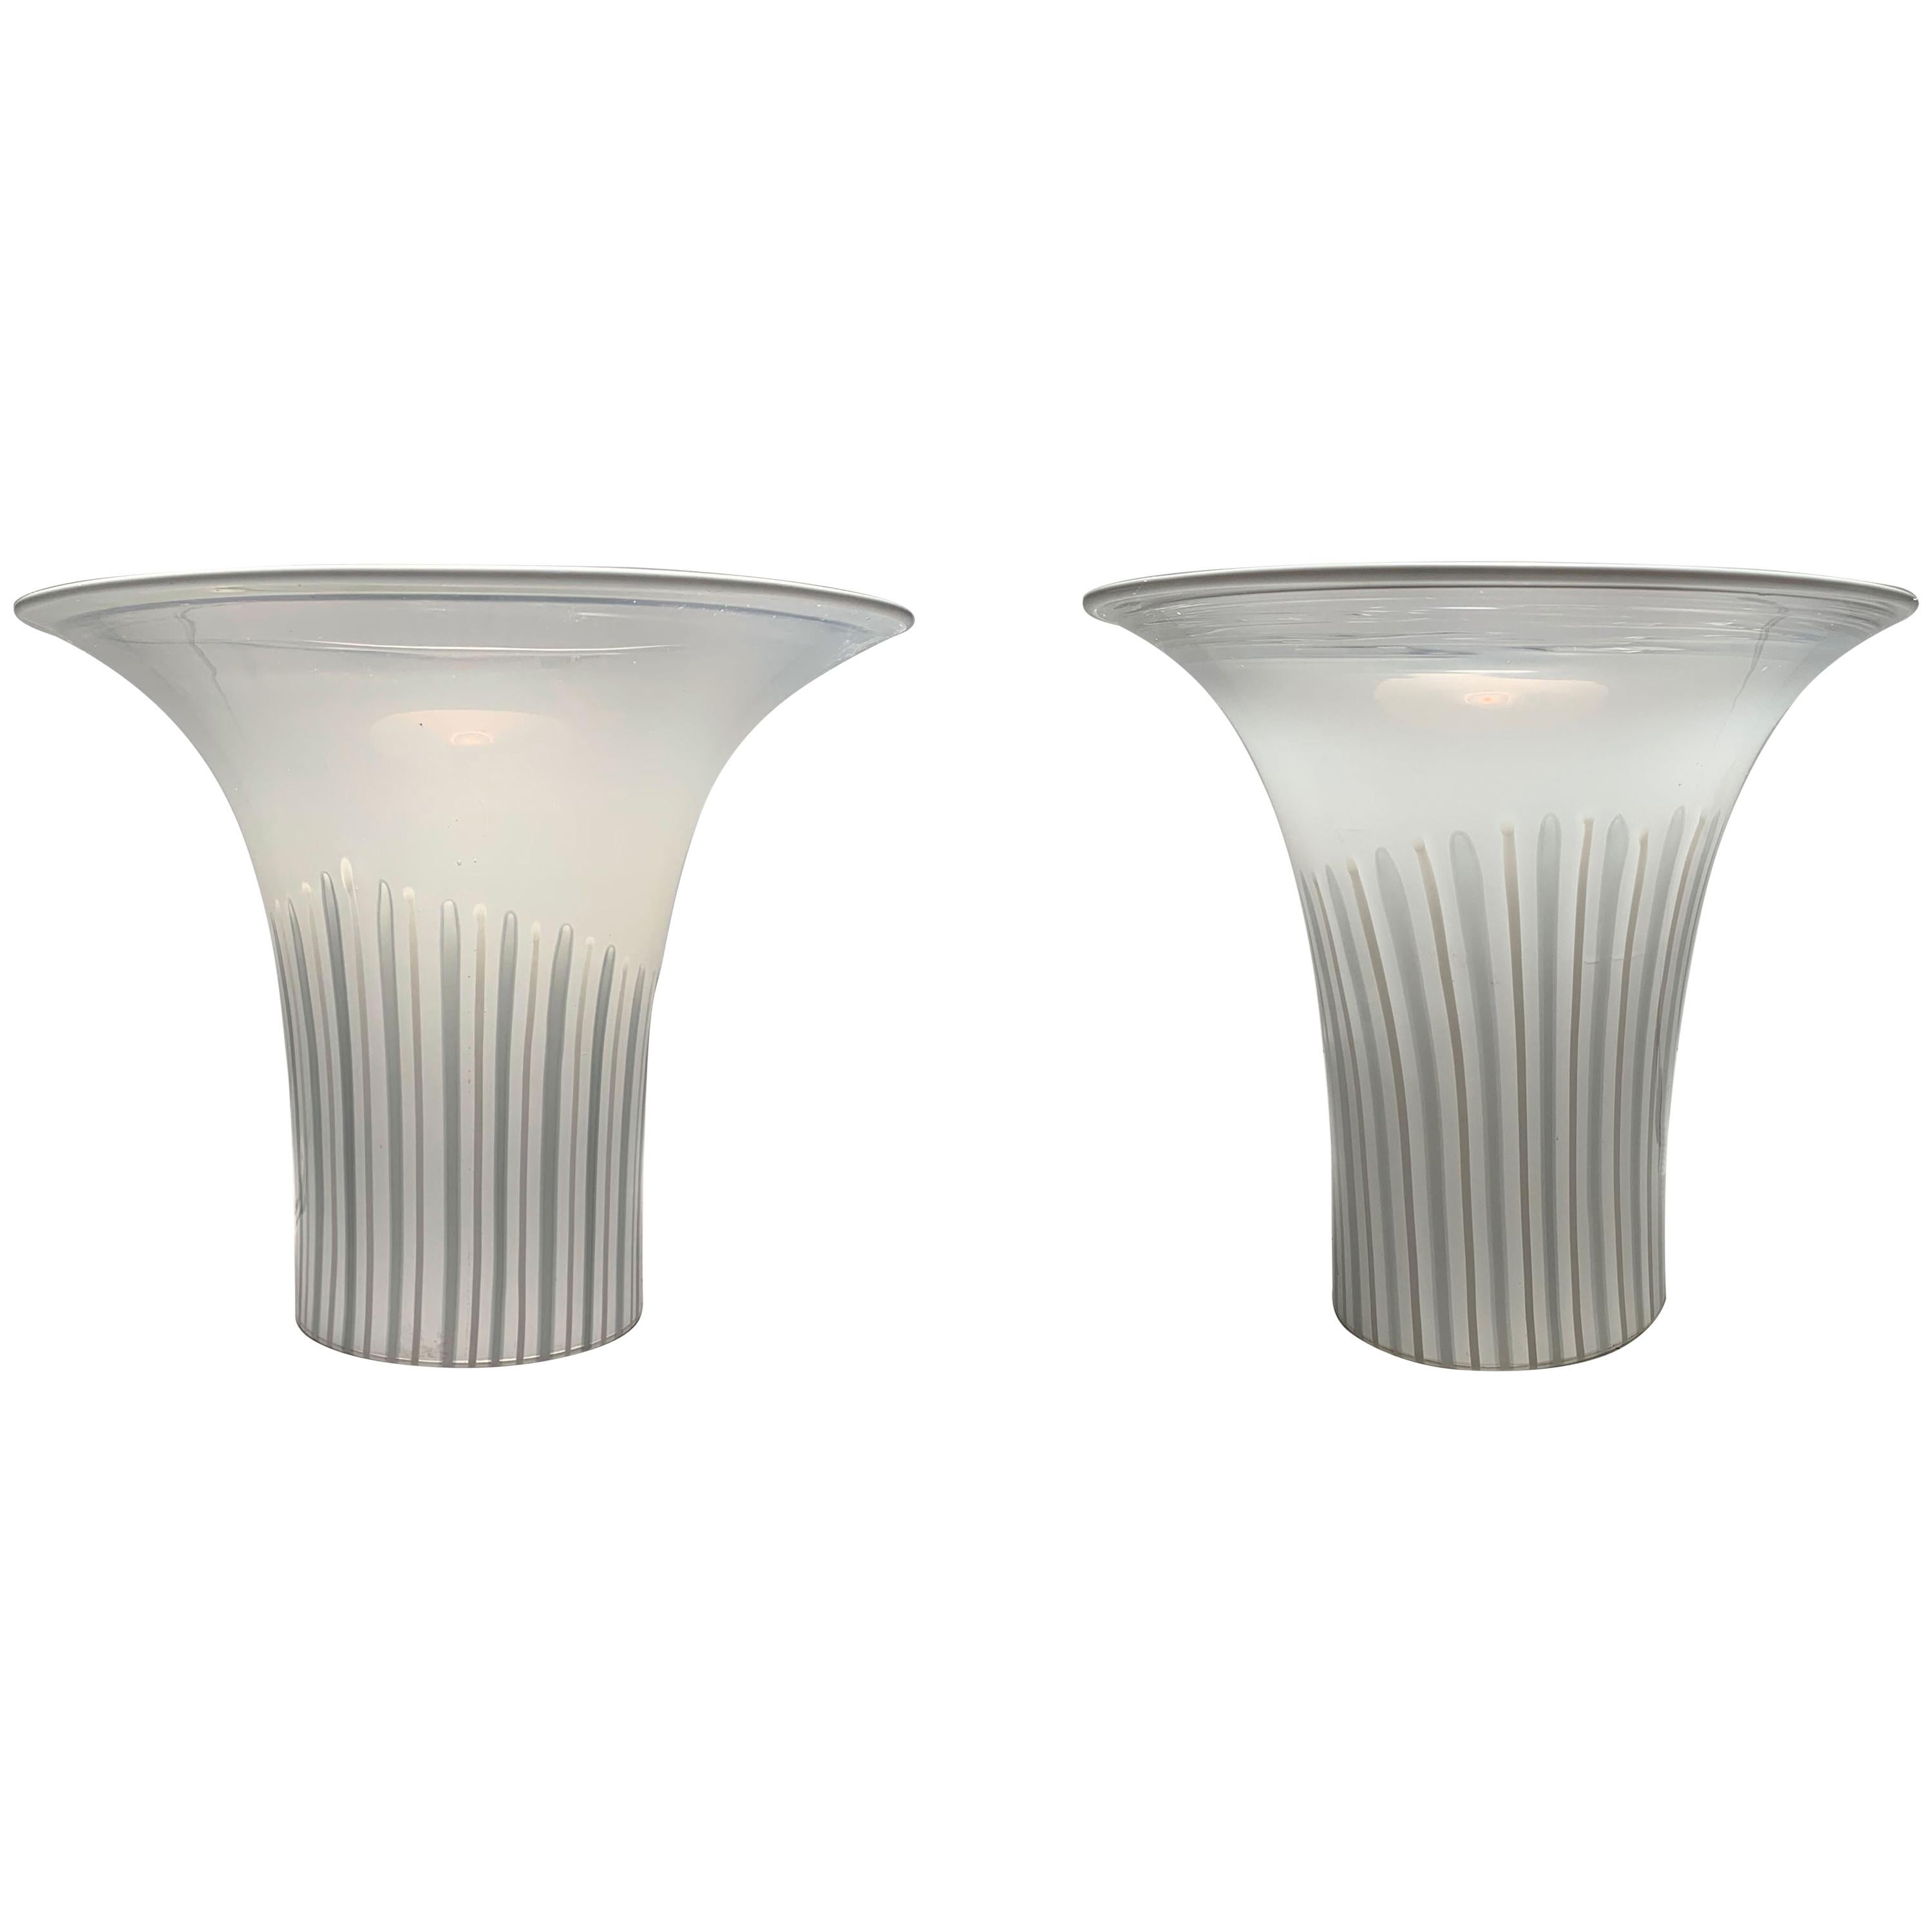 Murano glass tabletop torcheres. Soft illumination lamps for an interior. Italian glass lamps.

Possibly by Vistosi for Venini